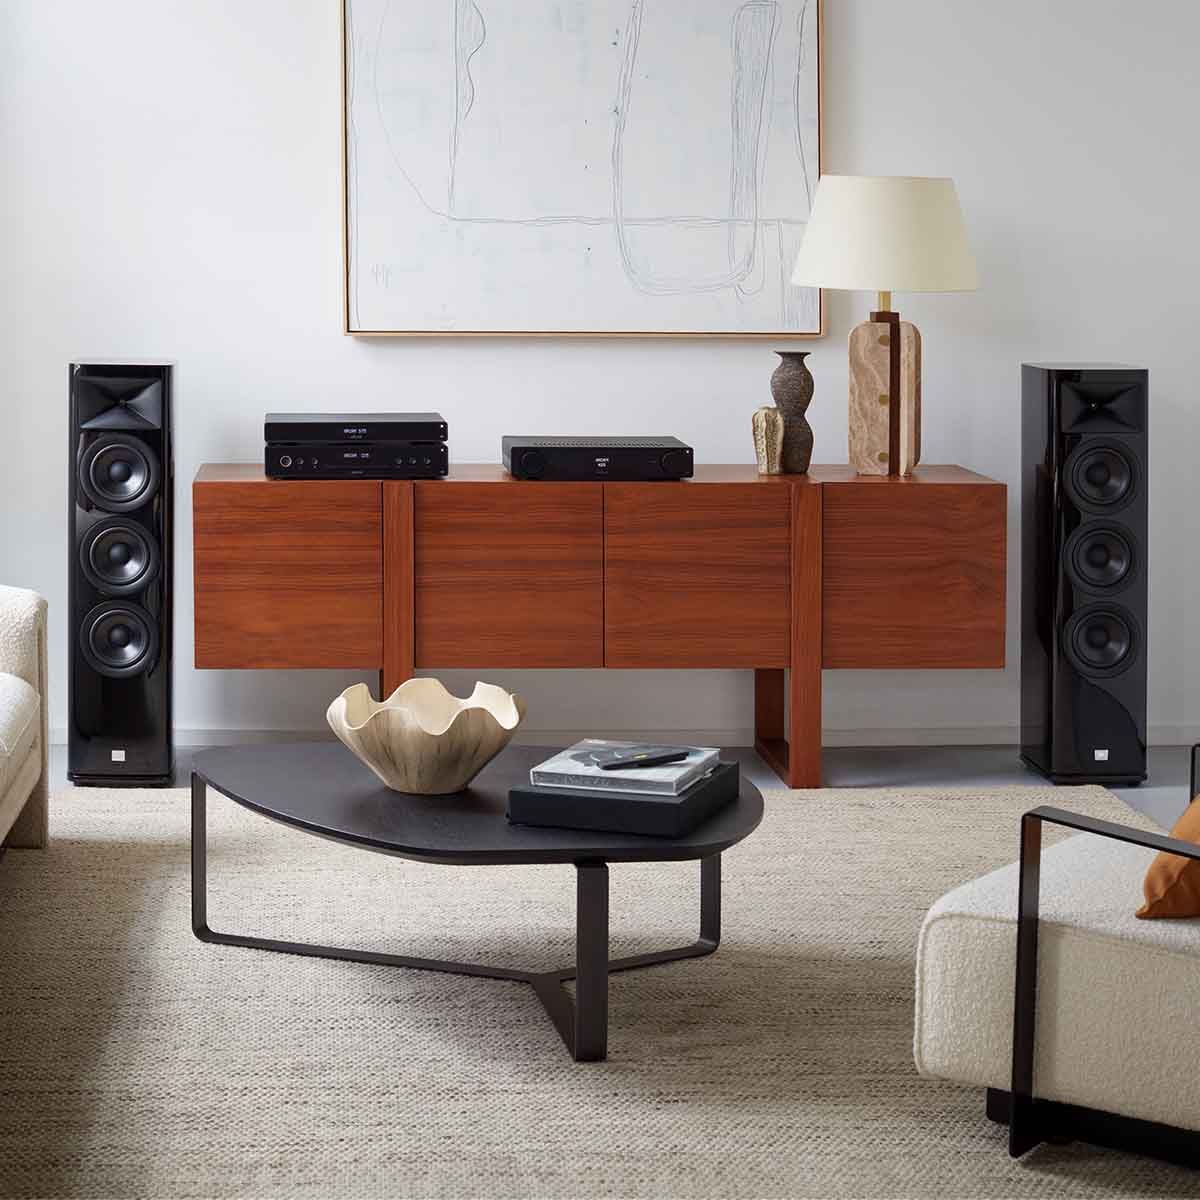 Arcam A25 Integrated Class G Amplifier on credenza with JBL HDI tower speakers